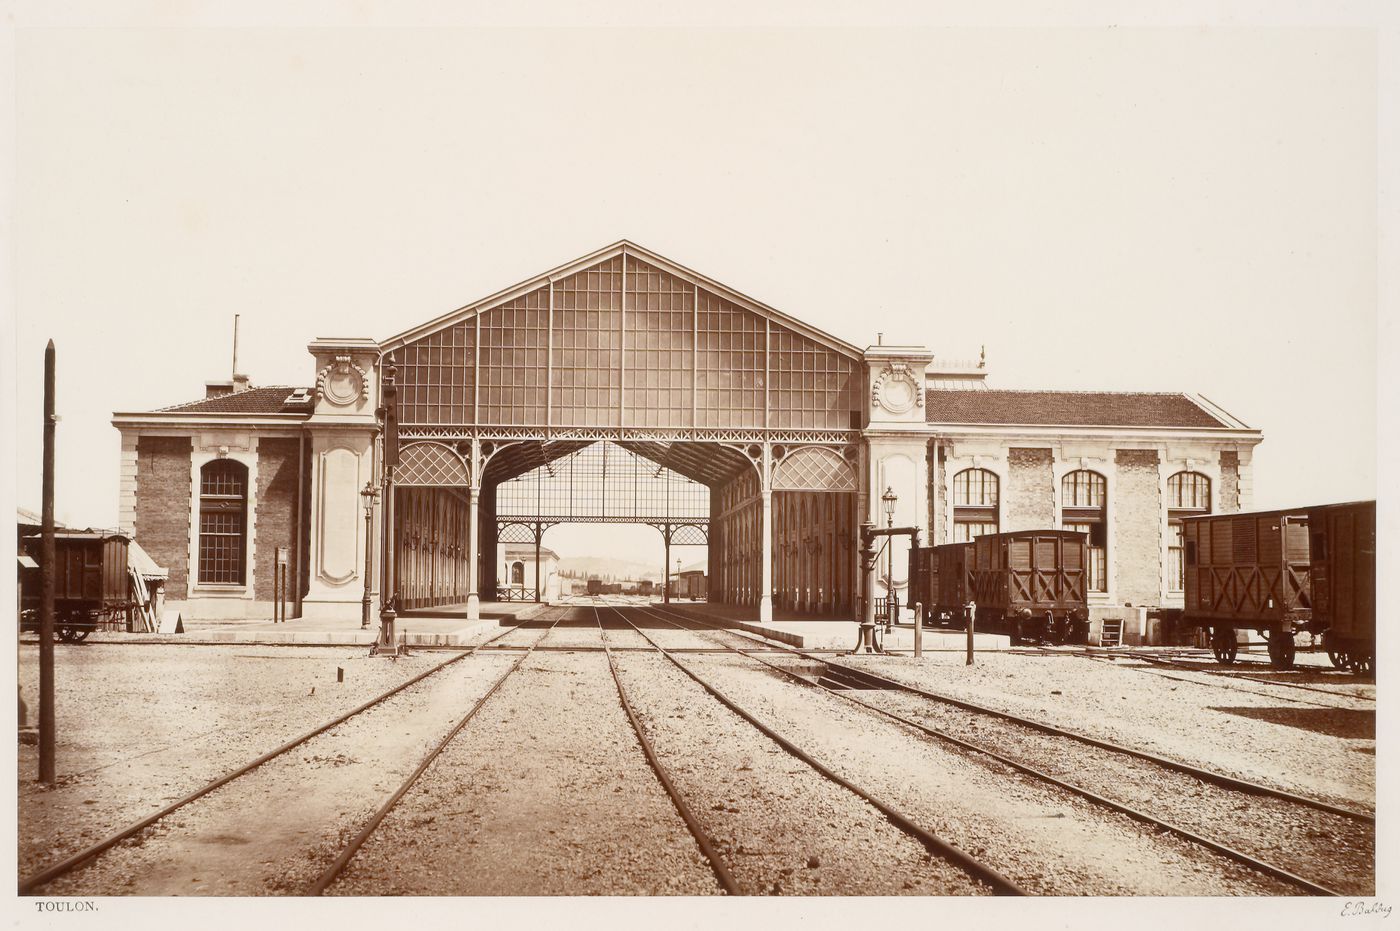 View of newly constructed train station, with tracks running through, Toulon, France